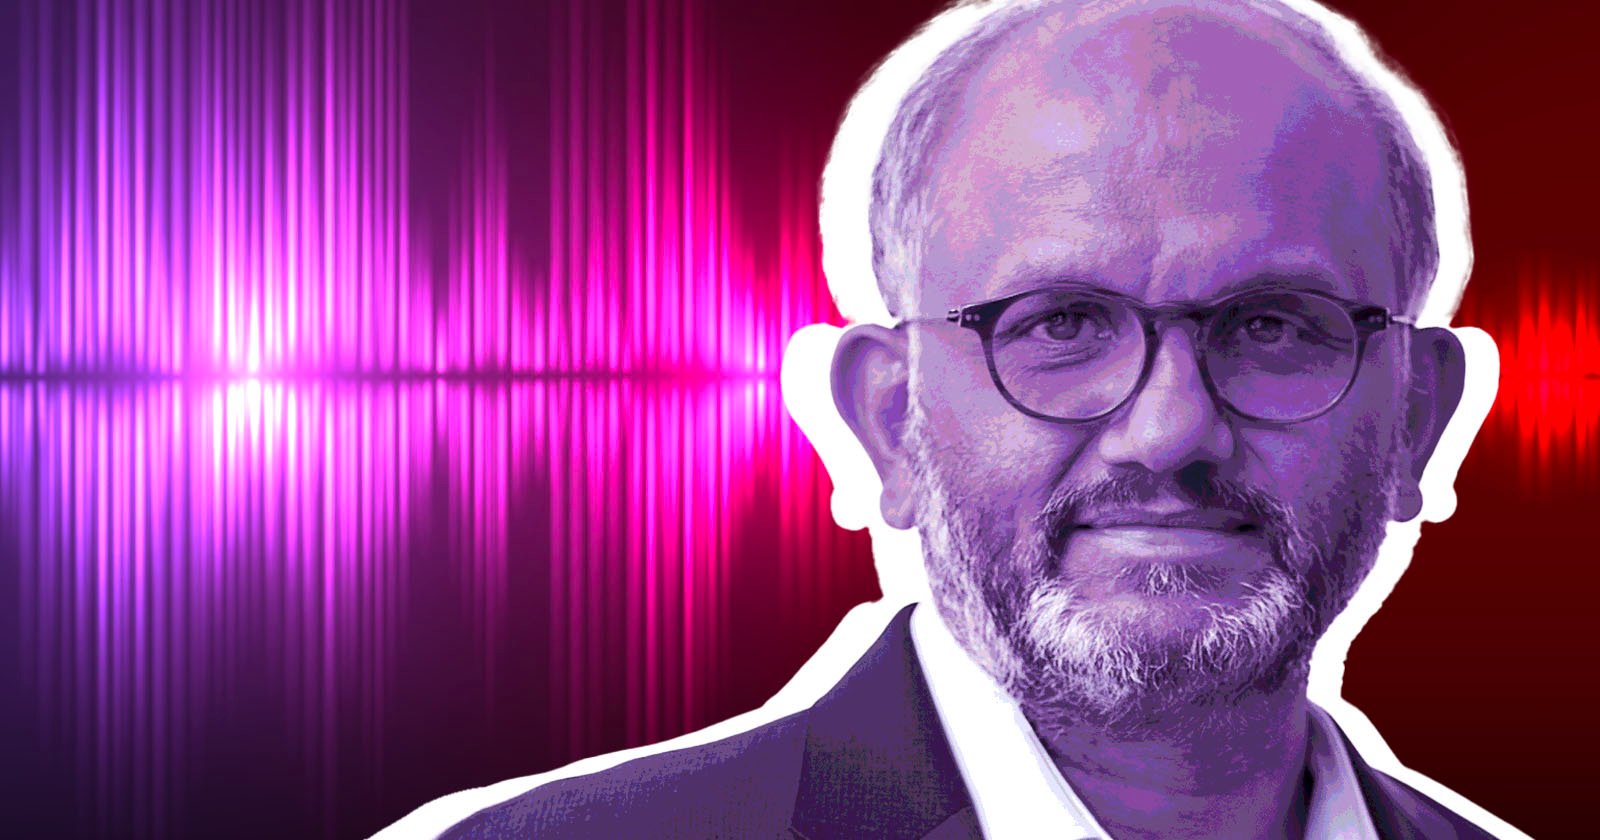 Shantanu Narayan with glasses and a beard, wearing a suit jacket, is shown against a vibrant background of pink and red soundwaves. The image has a purple tint and a white outline around the person, giving a graphic design effect.